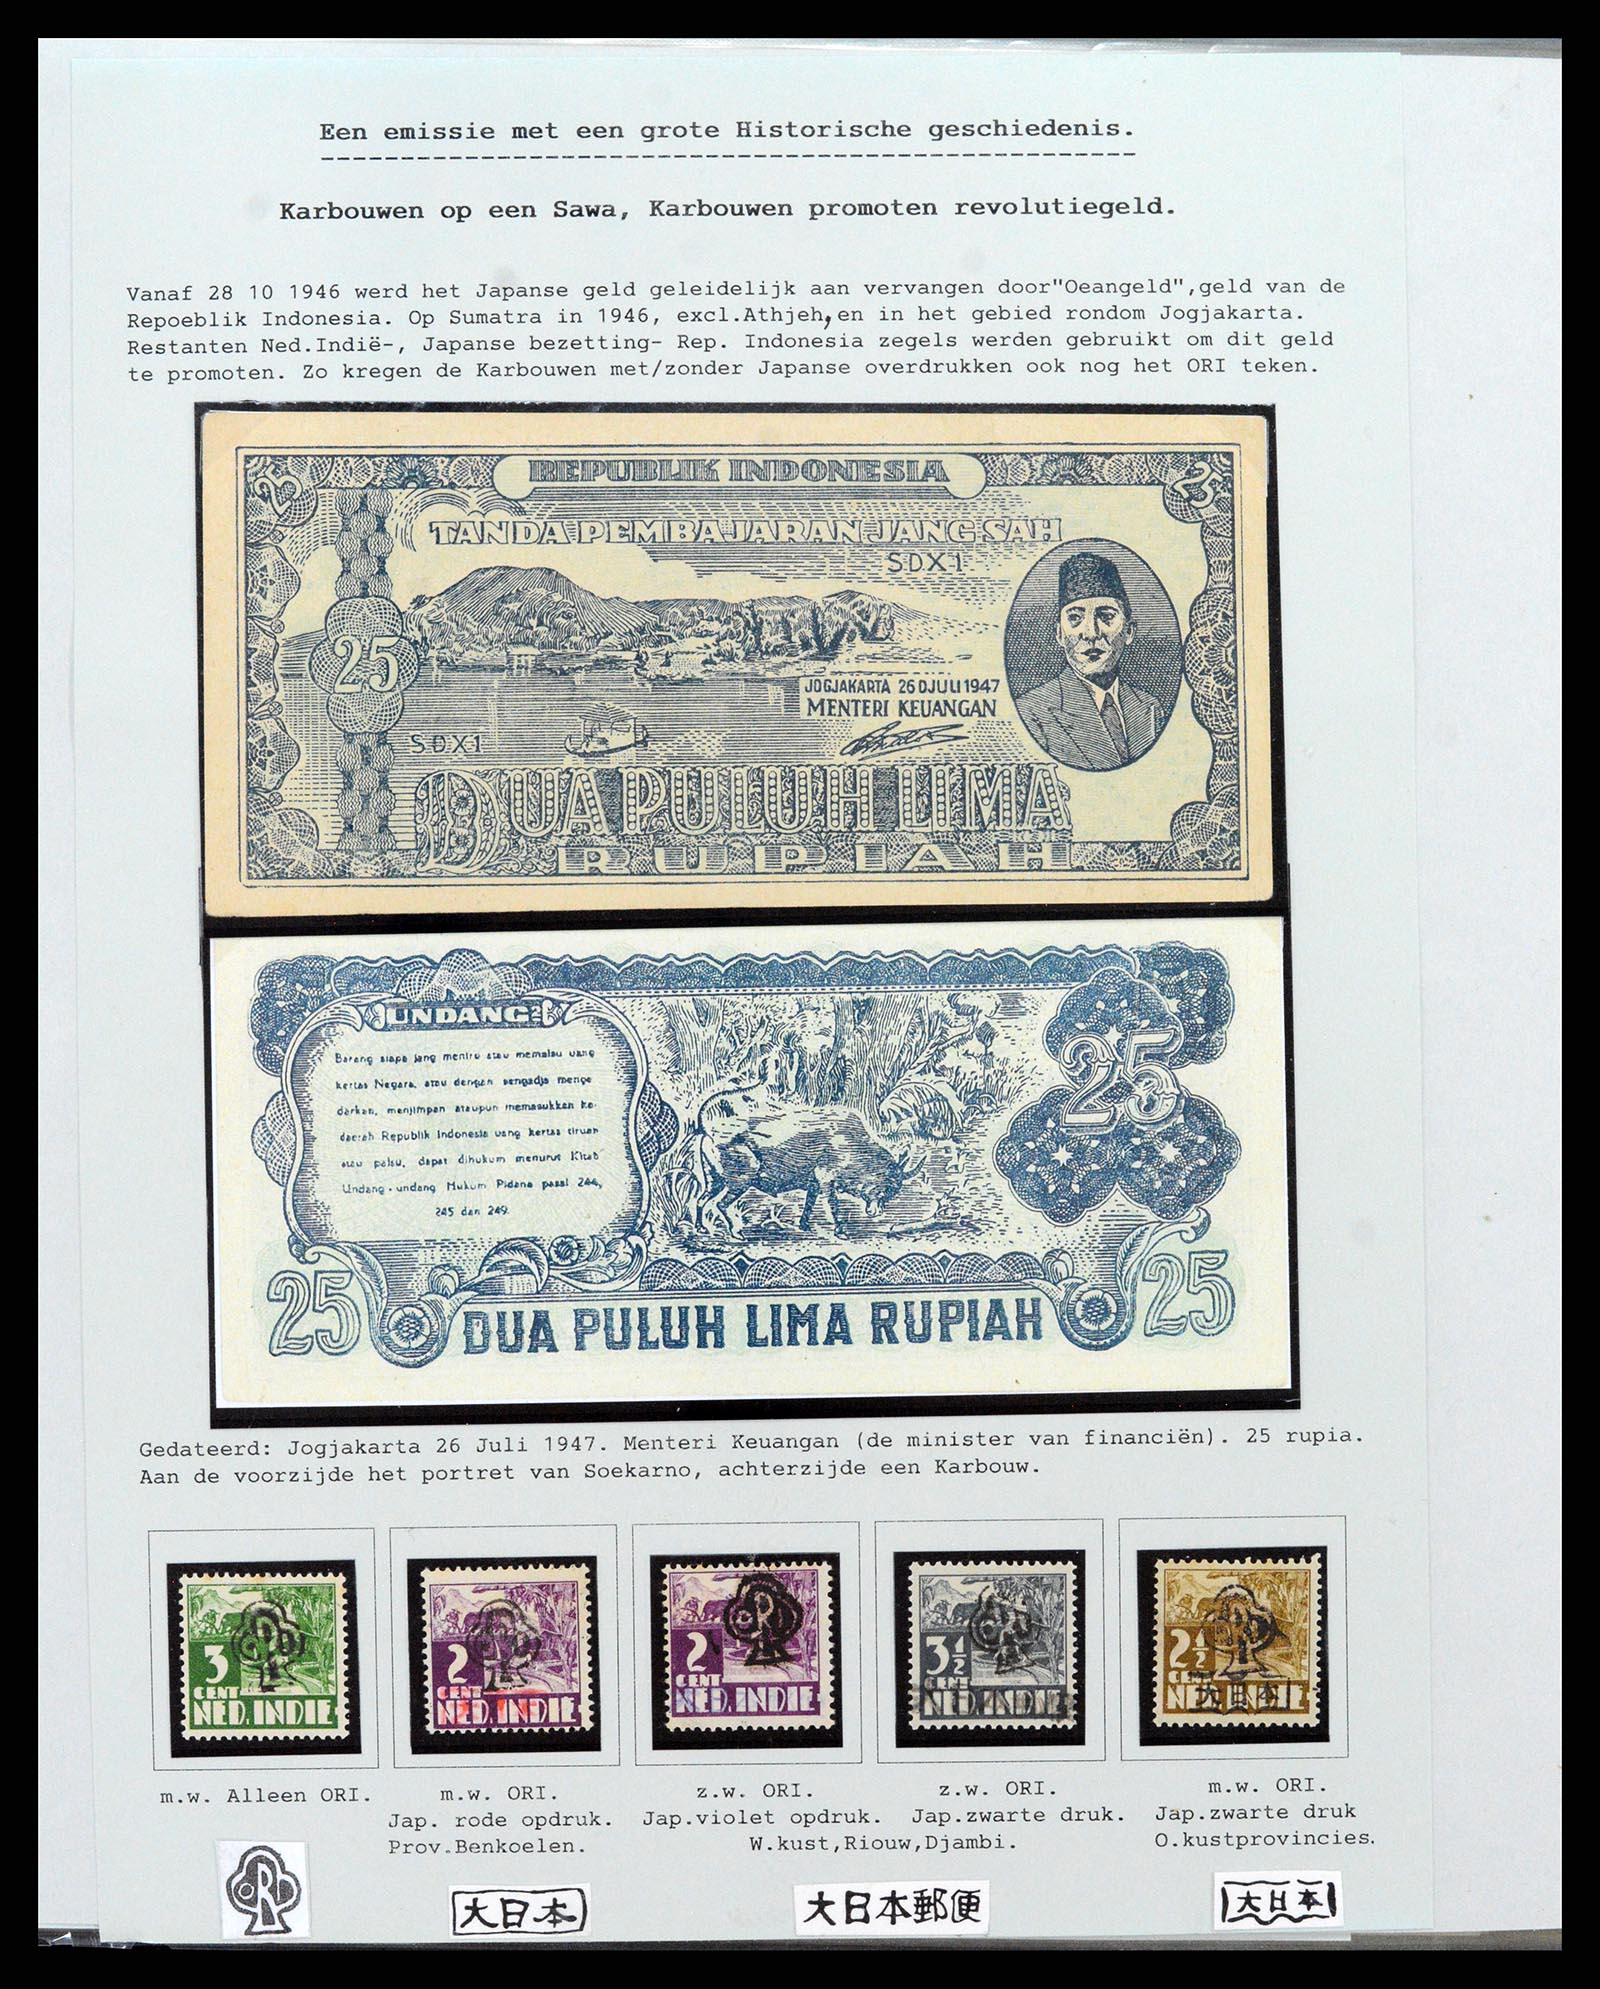 37689 037 - Stamp collection 37689 Japanese occupation Dutch East Indies and interim